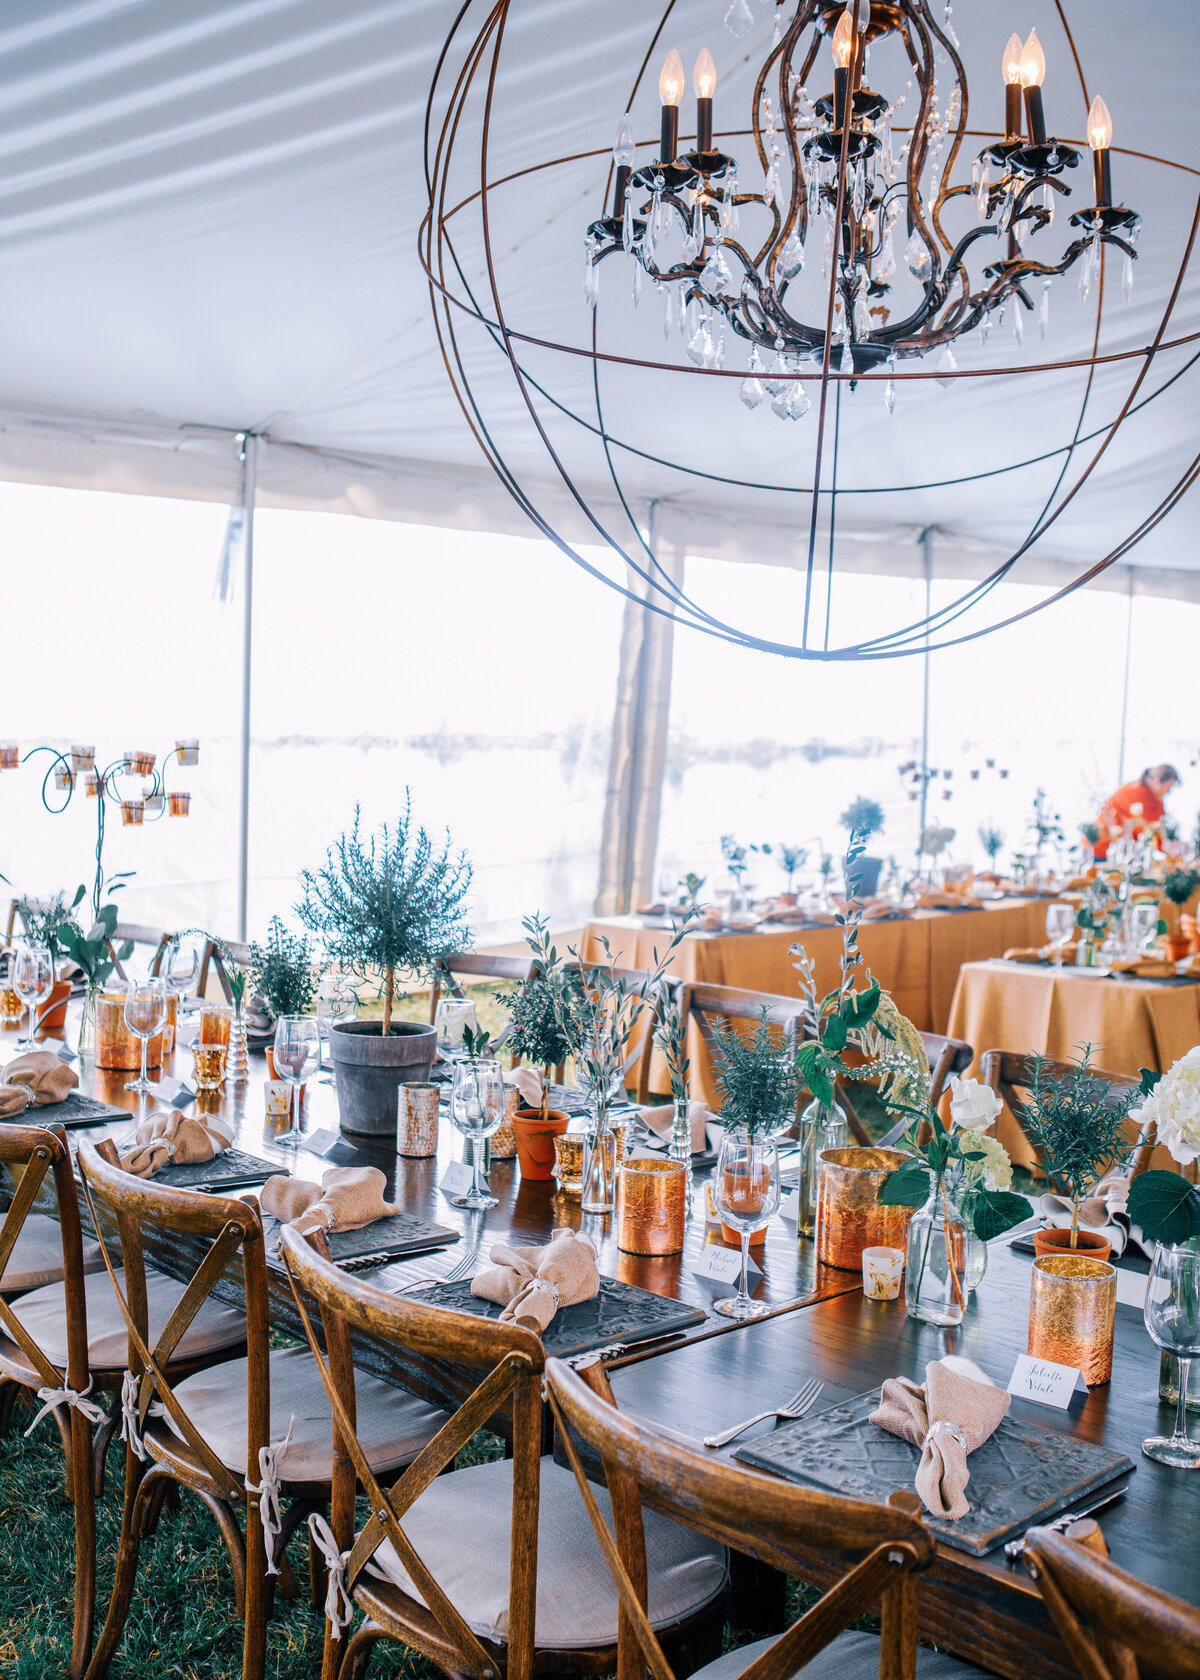 A rustic wedding in a marquee with a large round light chandelier and copper accents and wooden cross back chairs